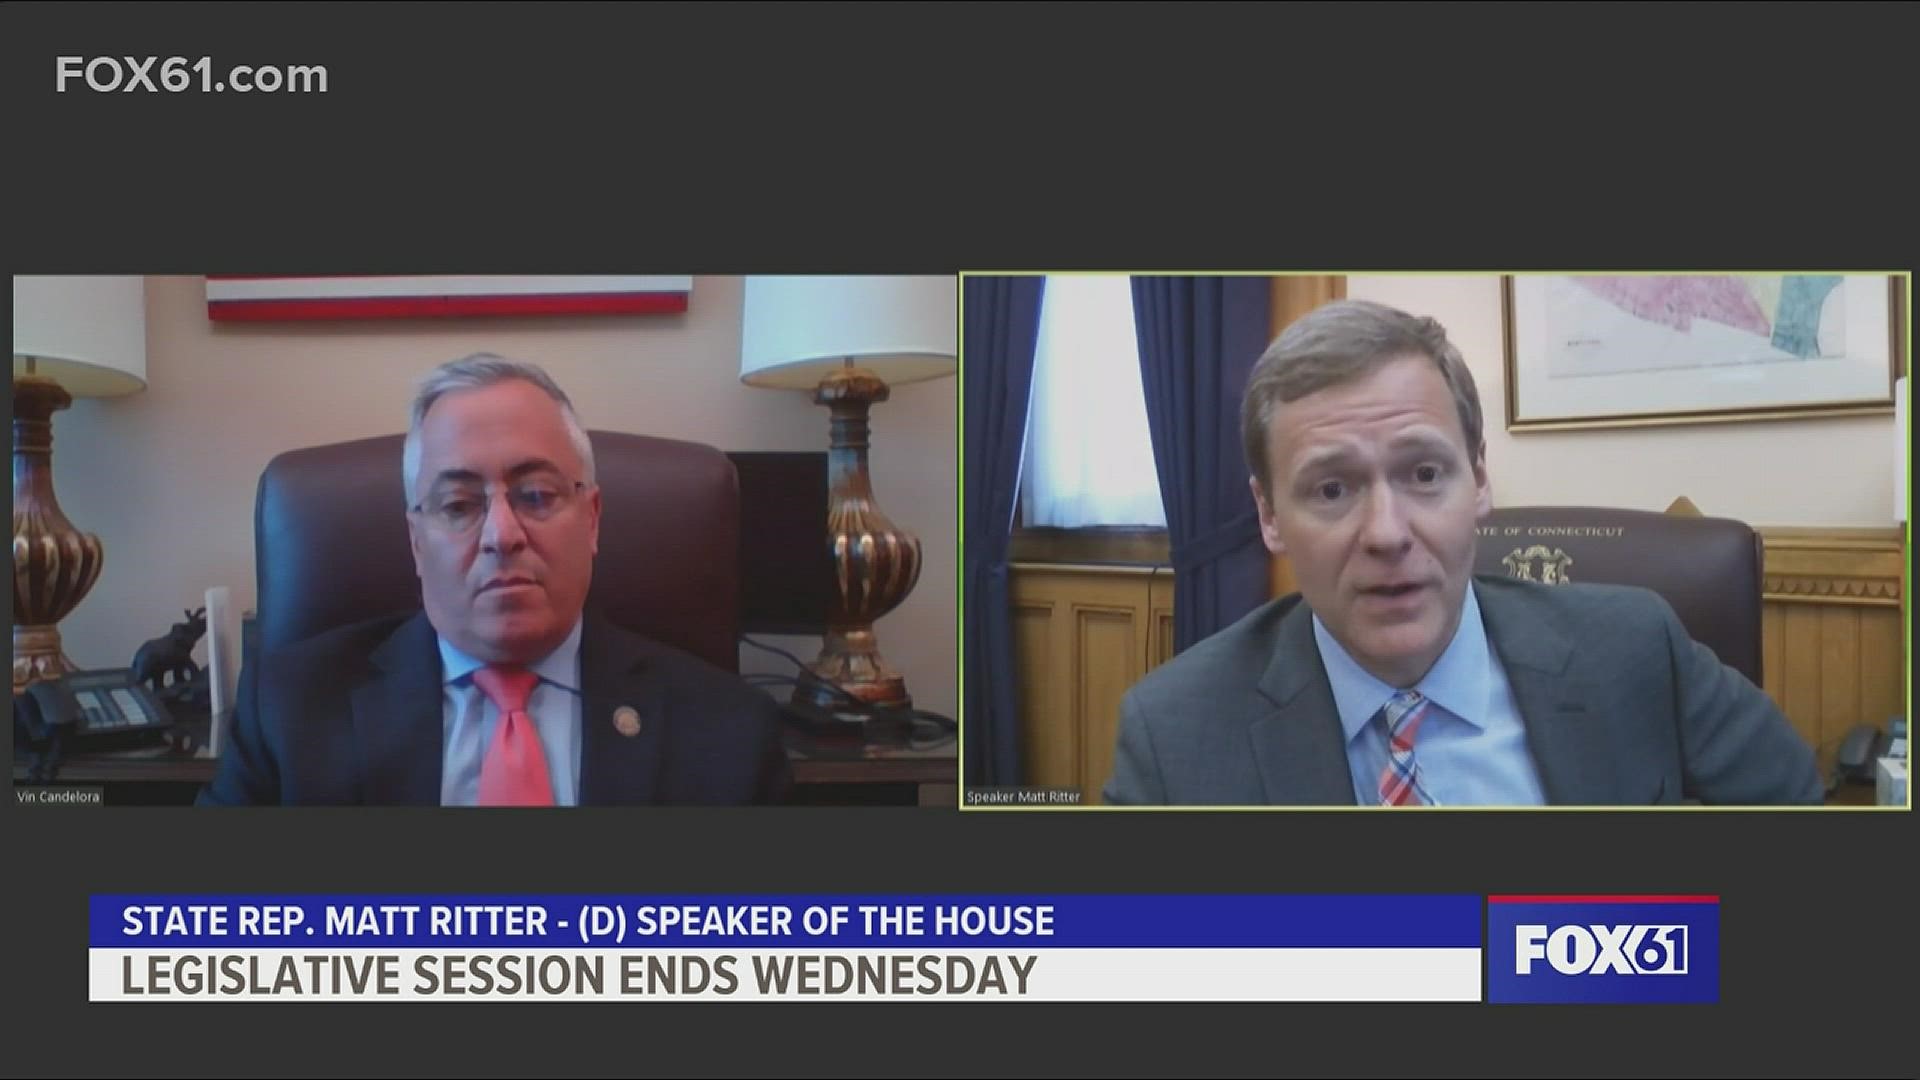 Speaker of the House Matt Ritter and House Minority Leader Vince Candelora talk about what's left to get done in the last week of the legislative session.